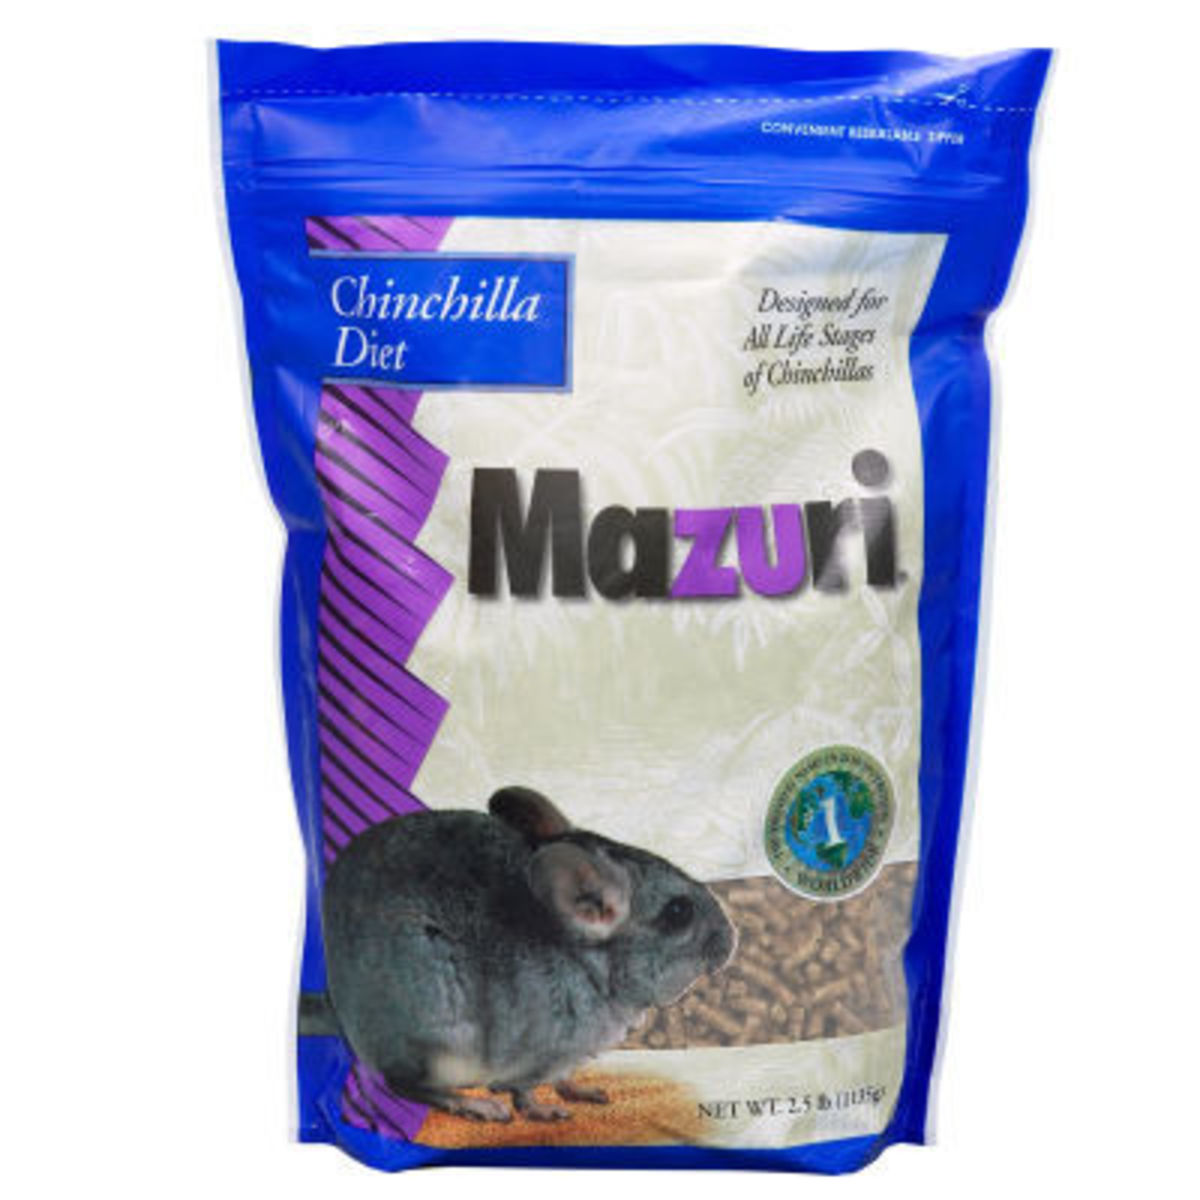 Mazuri food (May come in different packaging)